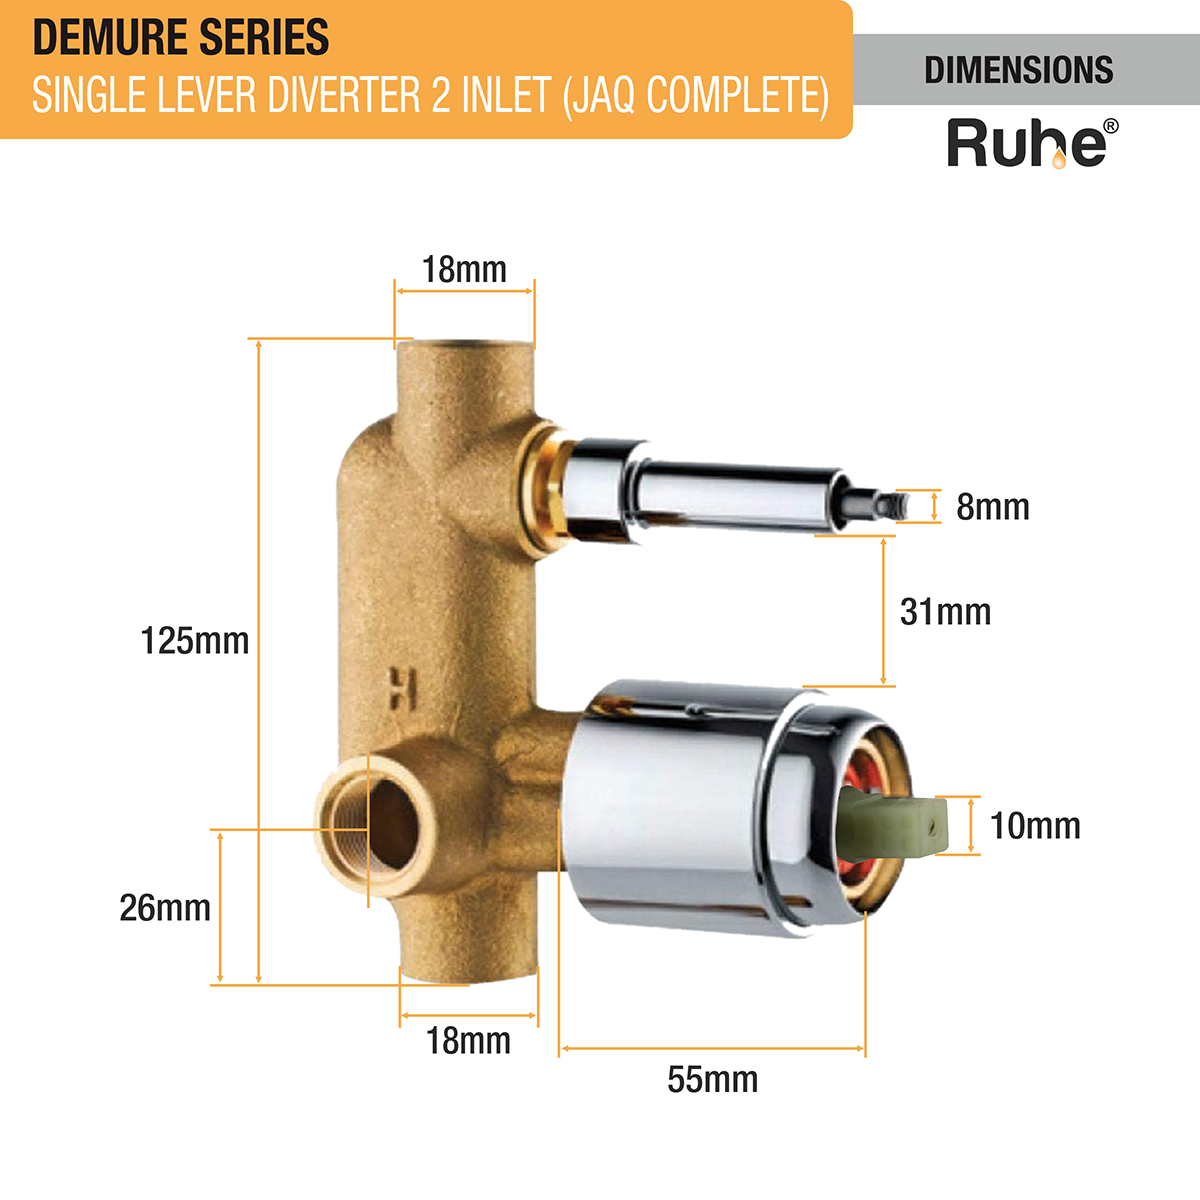 Demure Single Lever 2-inlet Diverter (JAQ Complete Set) dimensions and sizes